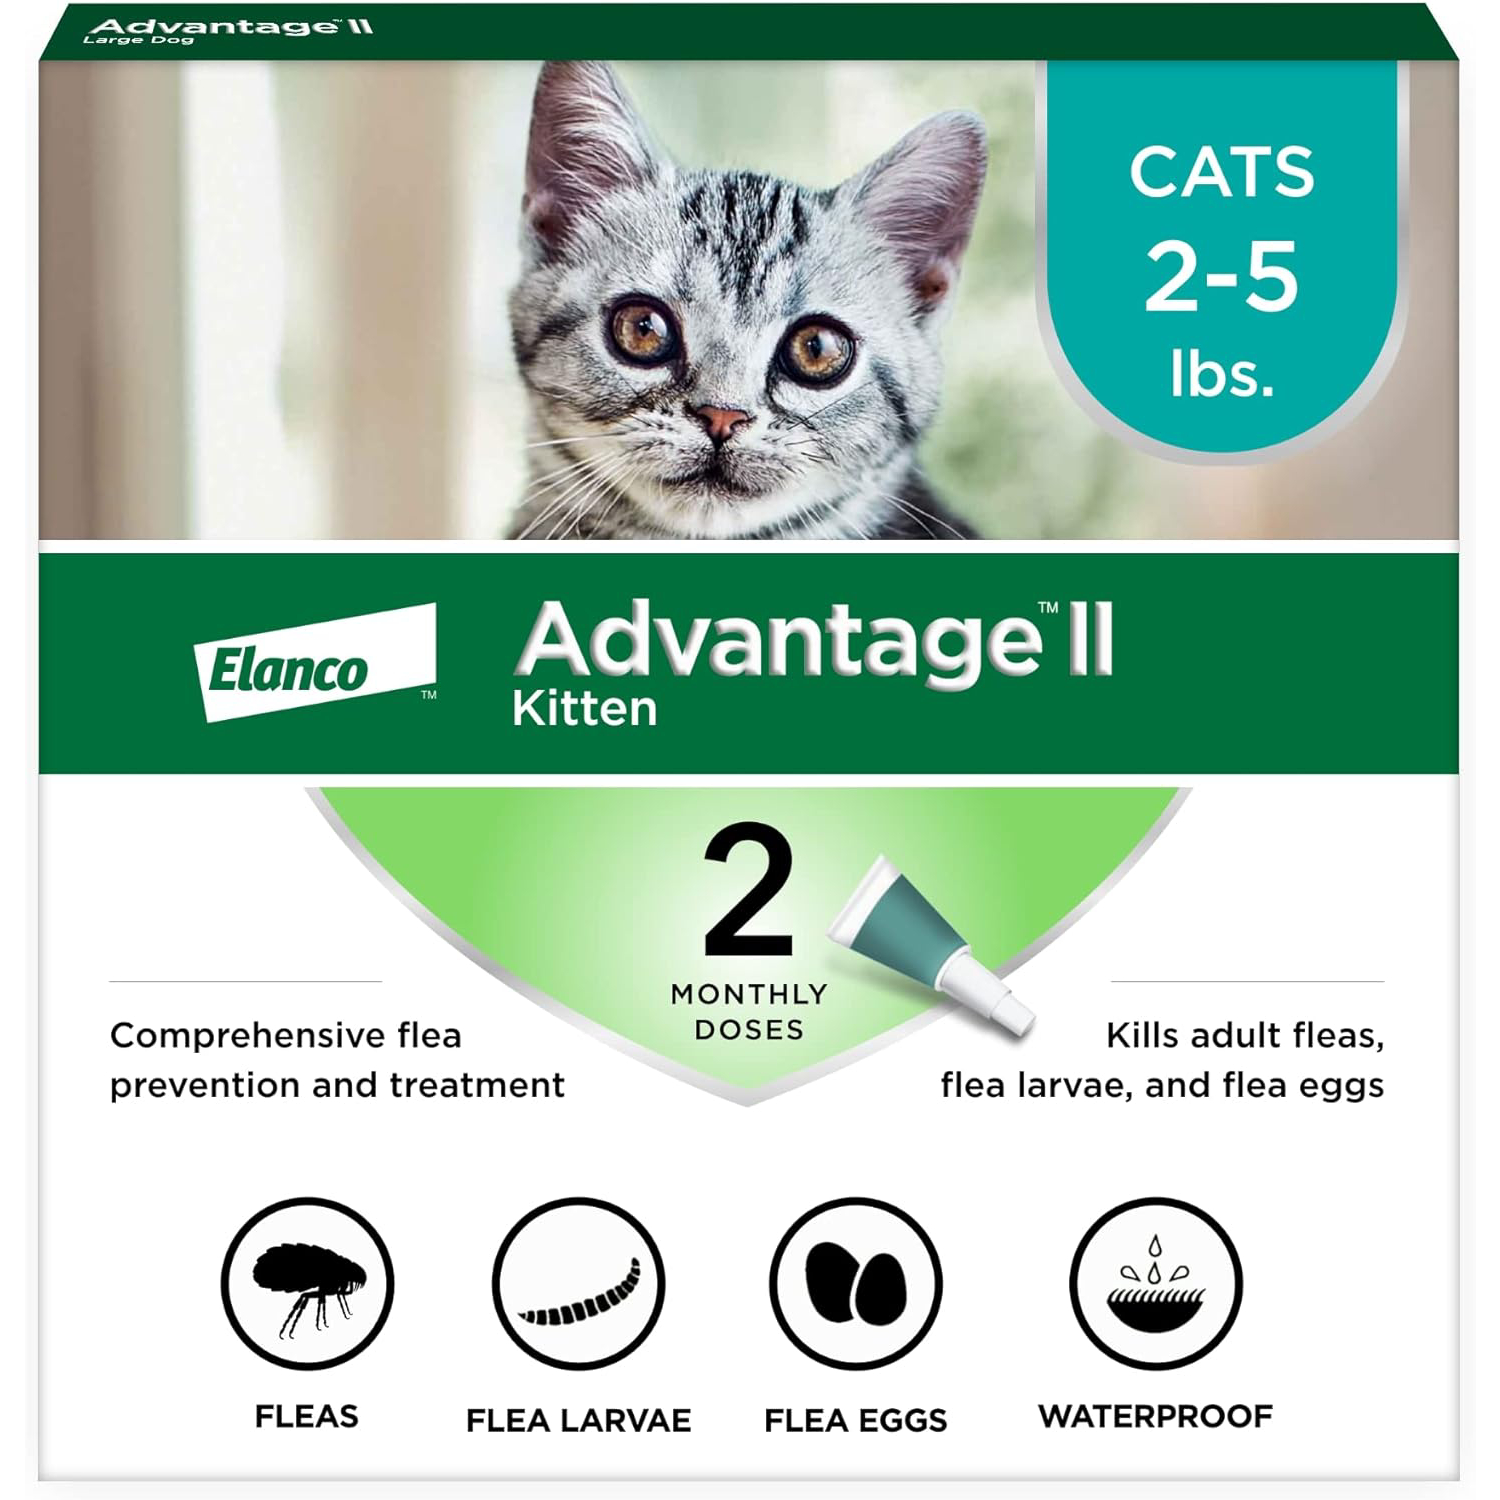 Advantage II Kitten Vet-Recommended Flea Treatment & Prevention _ Cats 2-5 lbs. _ 2-Month Supply new